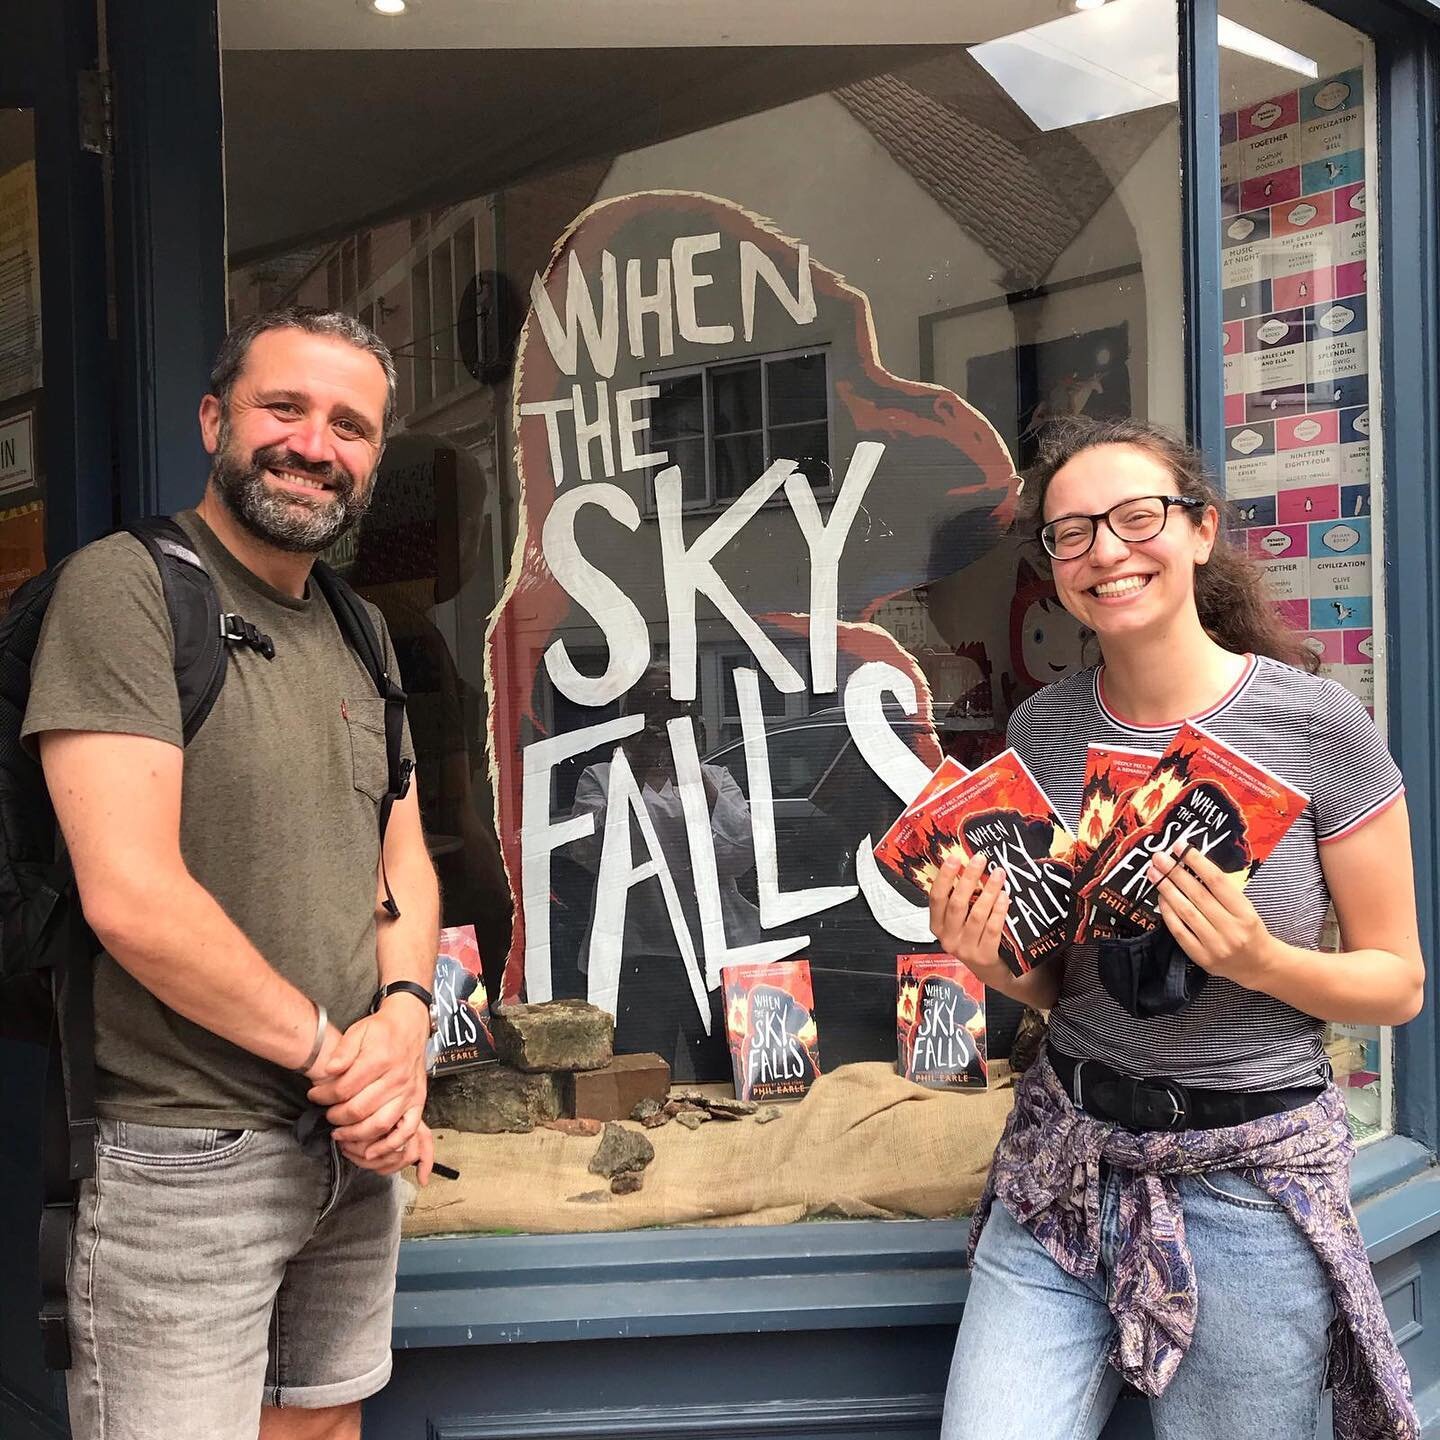 Great to meet @philearle as he tore around Yorkshire signing copies of his fabulous new book, &lsquo;When the Sky Falls&rsquo;. We now have signed copies and adorable little pin badges! Thanks Phil and thanks @phoebekateed for the fabulous gorilla in